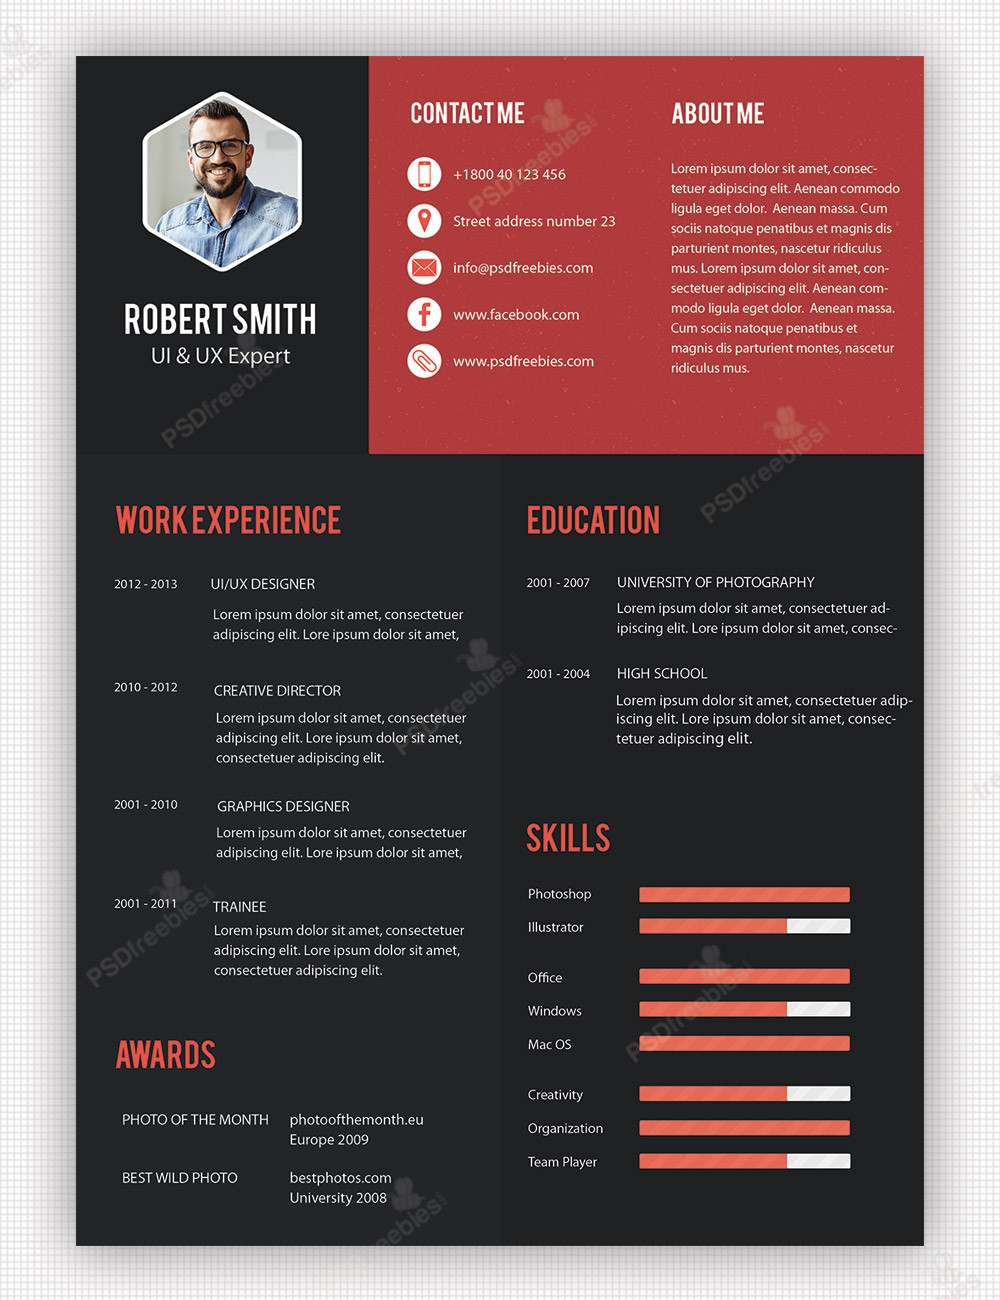 Resume Templates for Experienced It Professionals Free Download Creative Professional Resume Template Free Psd â Psdfreebies.com